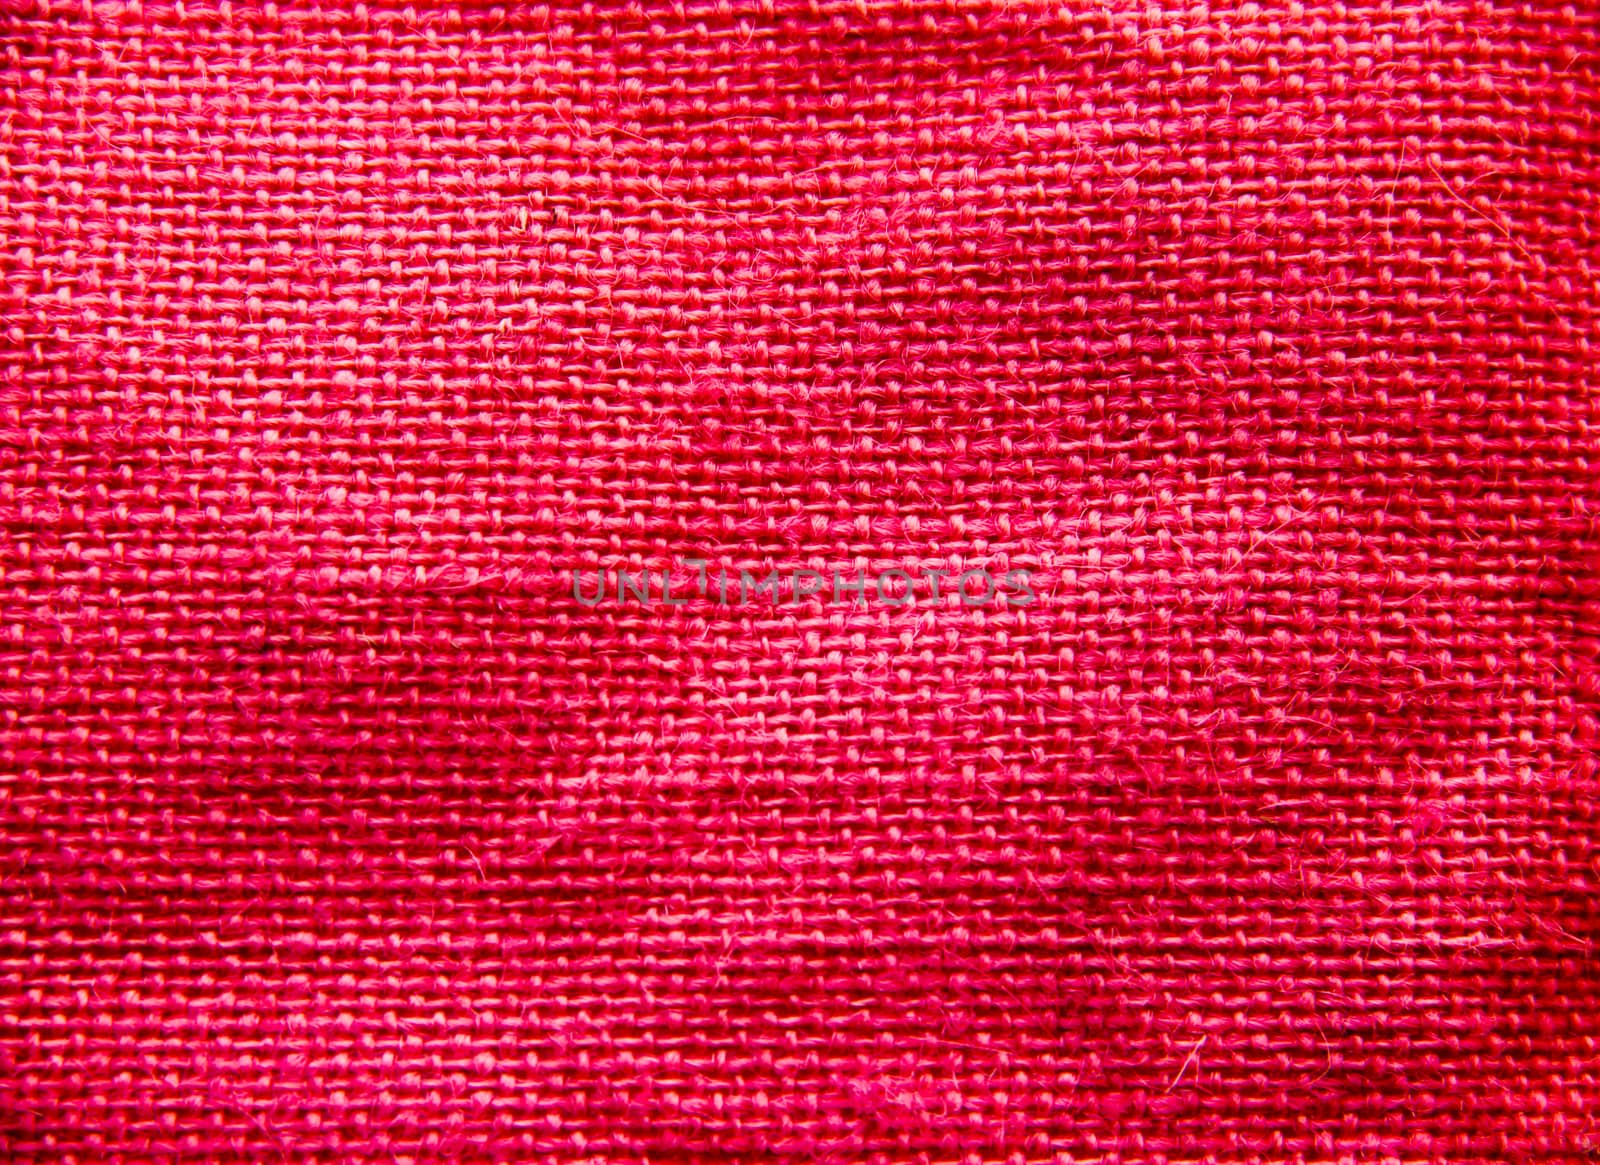 Woven fabric by spafra